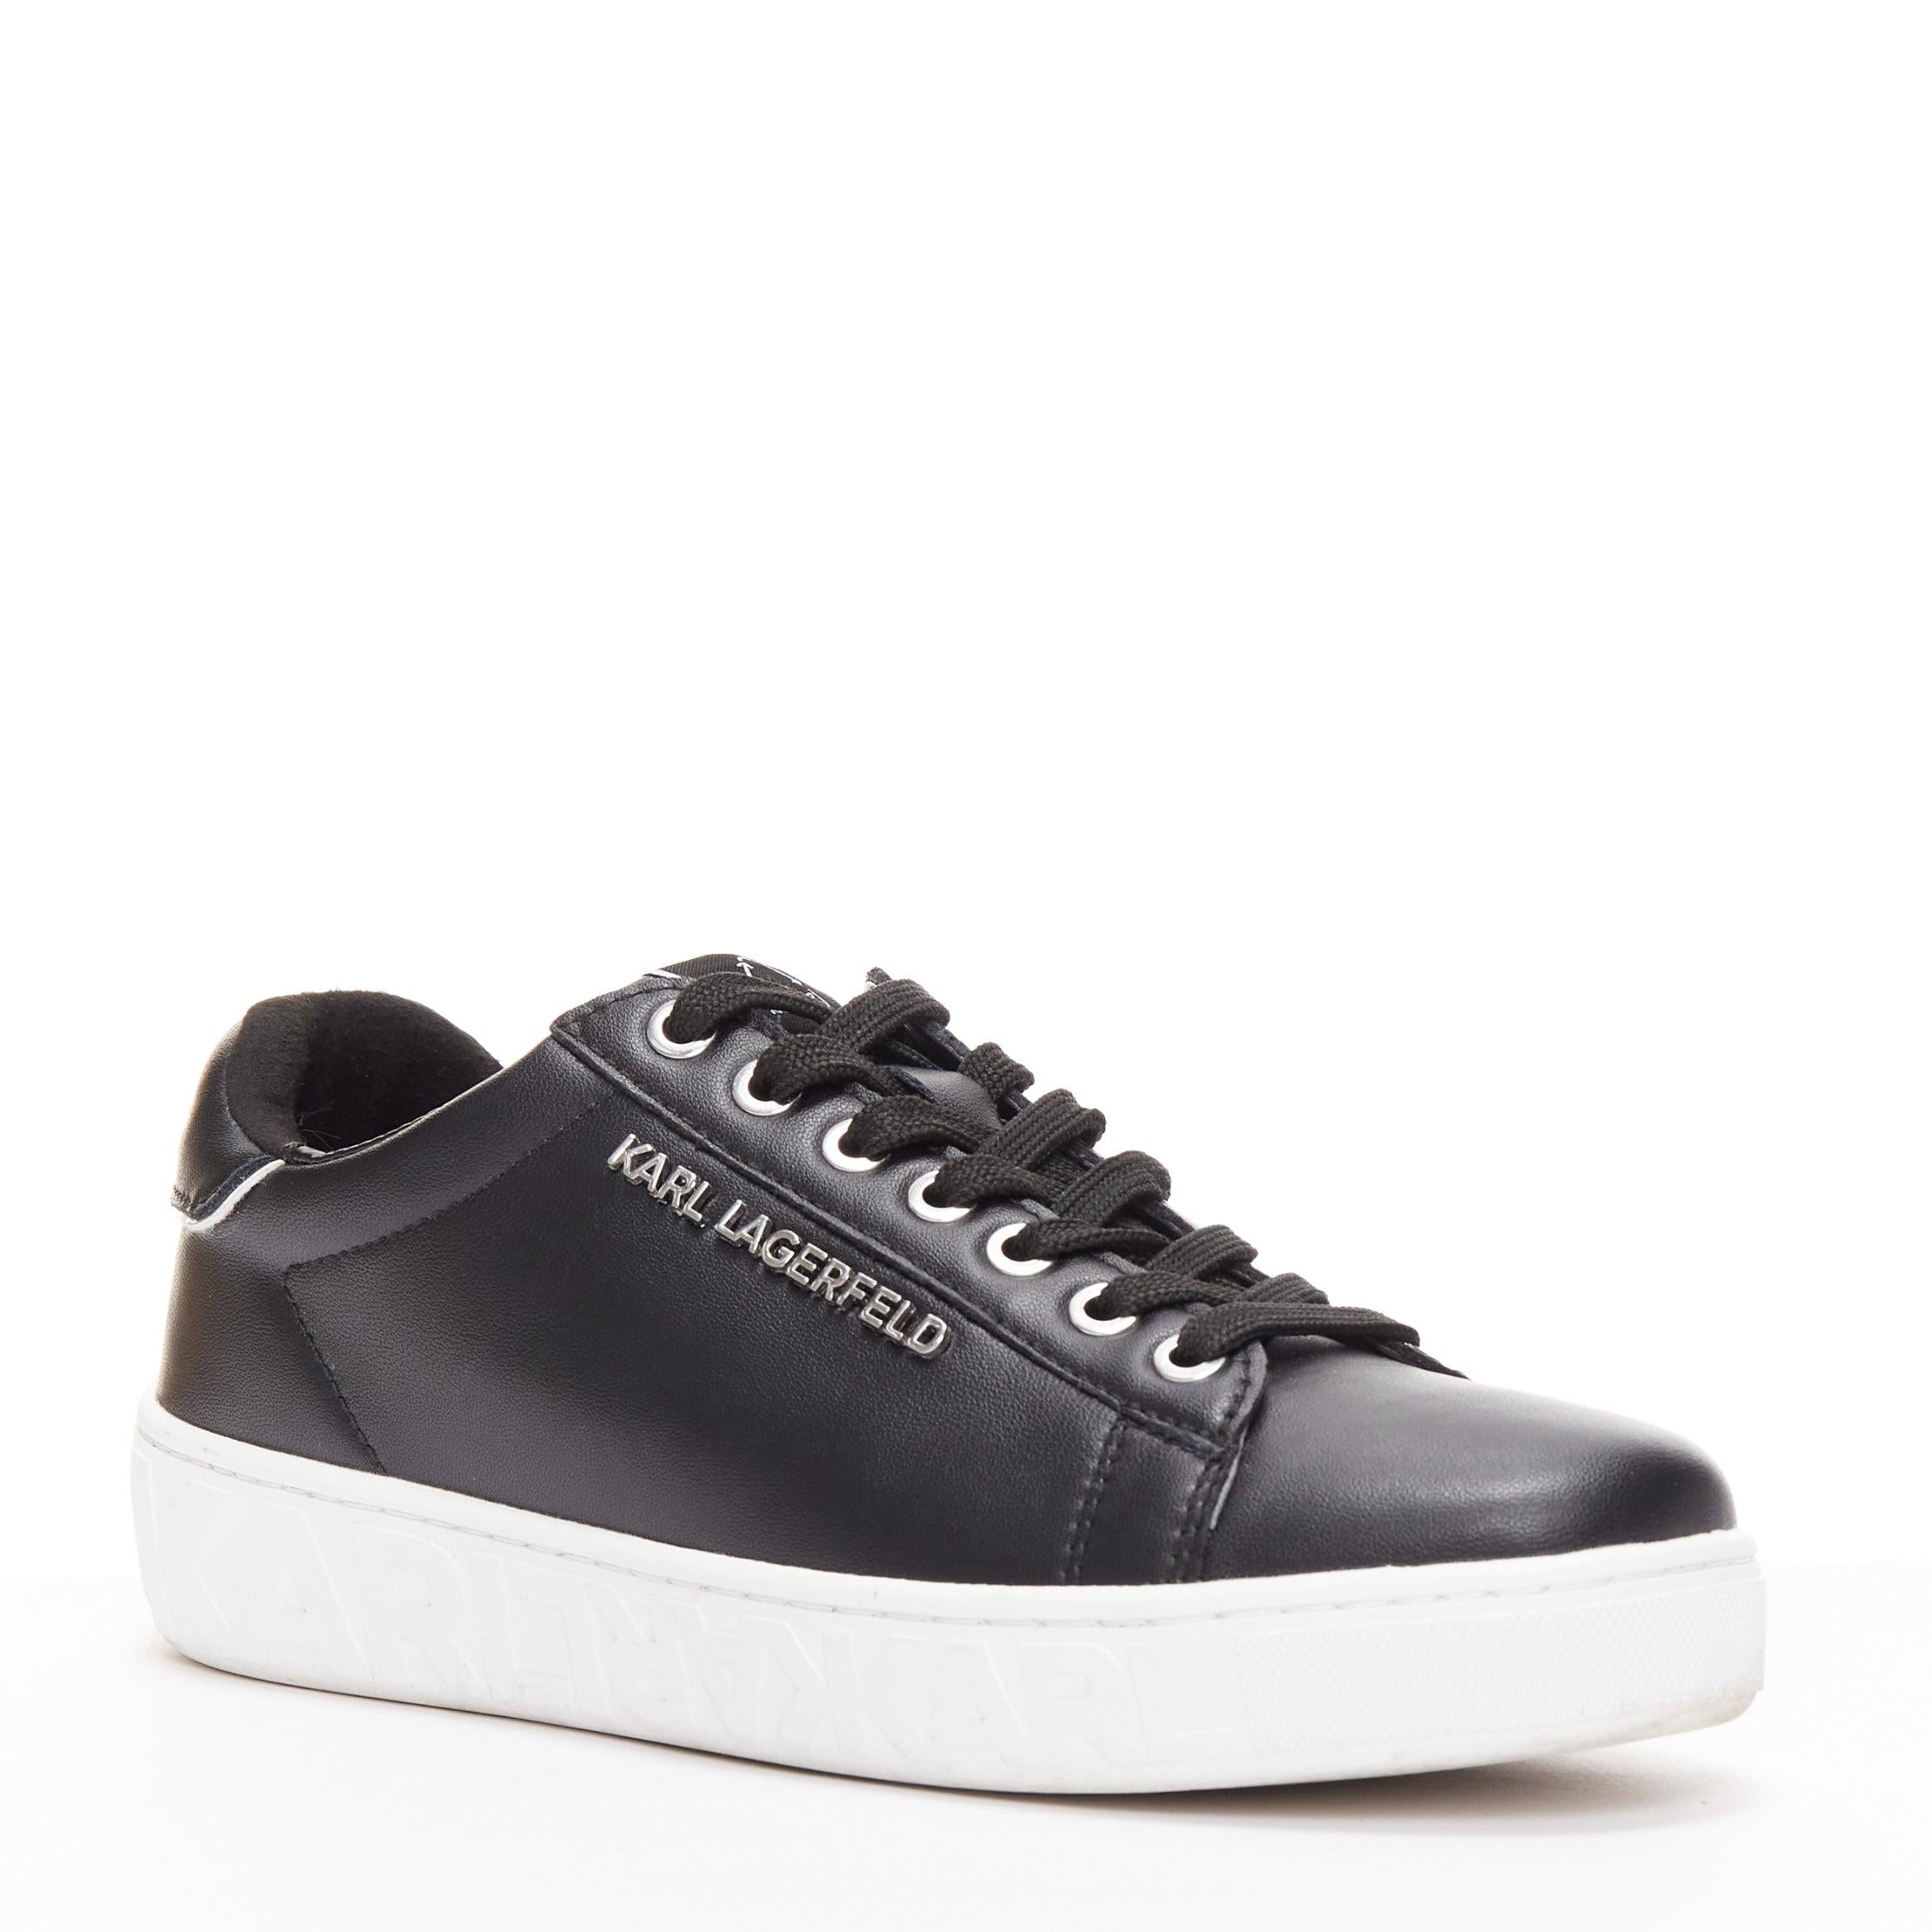 KARL LAGERFELD black leather silver logo chunky lace up sneakers EU38
Reference: NILI/A00065
Brand: Karl Lagerfeld
Material: Leather
Color: Black, White
Pattern: Solid
Closure: Lace Up
Lining: Black Leather
Extra Details: Logo at back.
Made in: